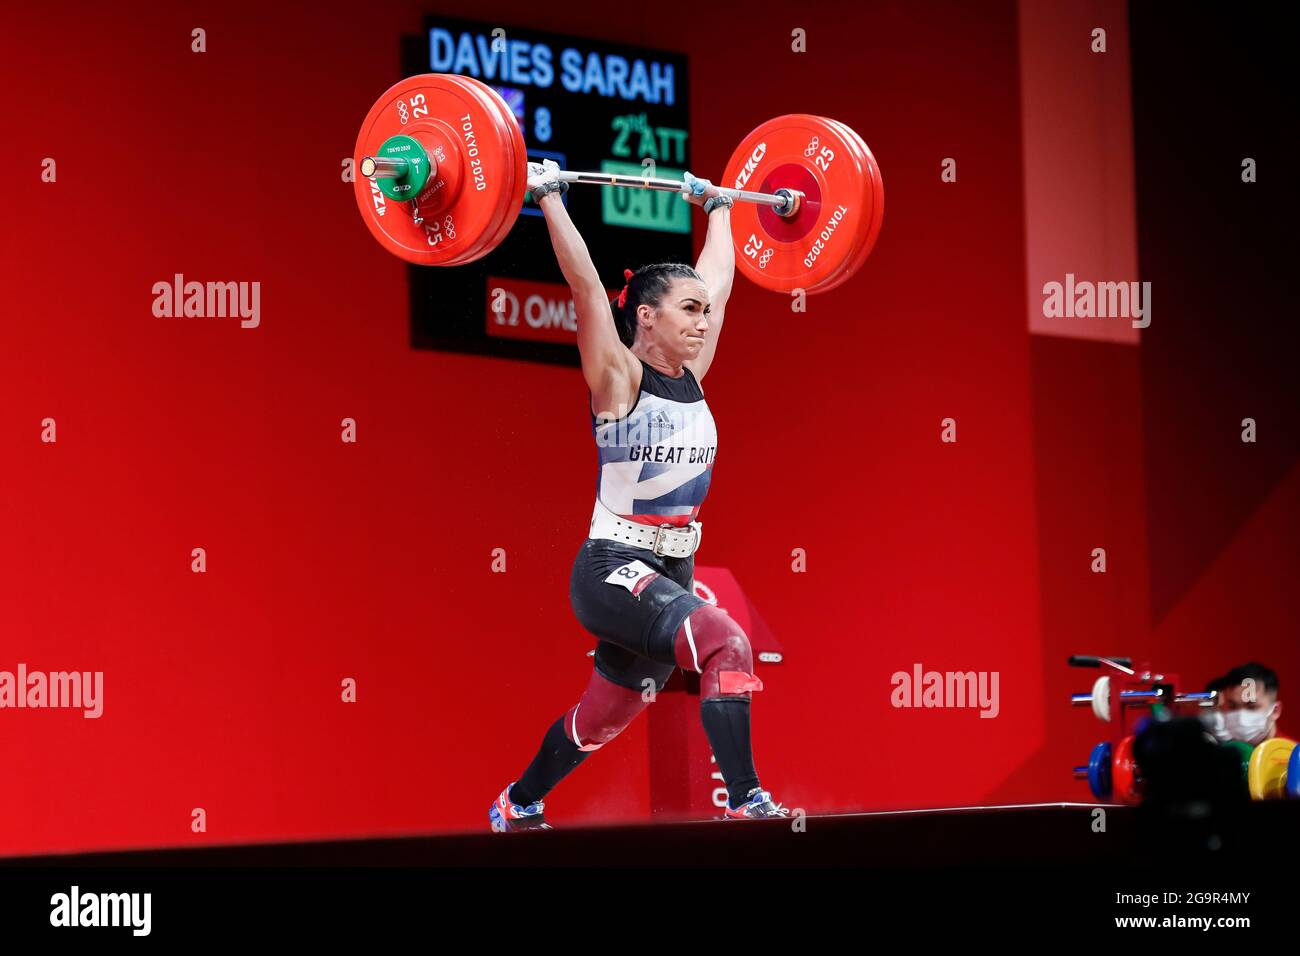 Tokyo, Japan. 27th July, 2021. SARAH DAVIES (GBR) competes in the women's 64kg Group A weightlifting event during the Tokyo 2020 Olympic Games at Tokyo International Forum. (Credit Image: © Rodrigo Reyes Marin/ZUMA Press Wire) Stock Photo